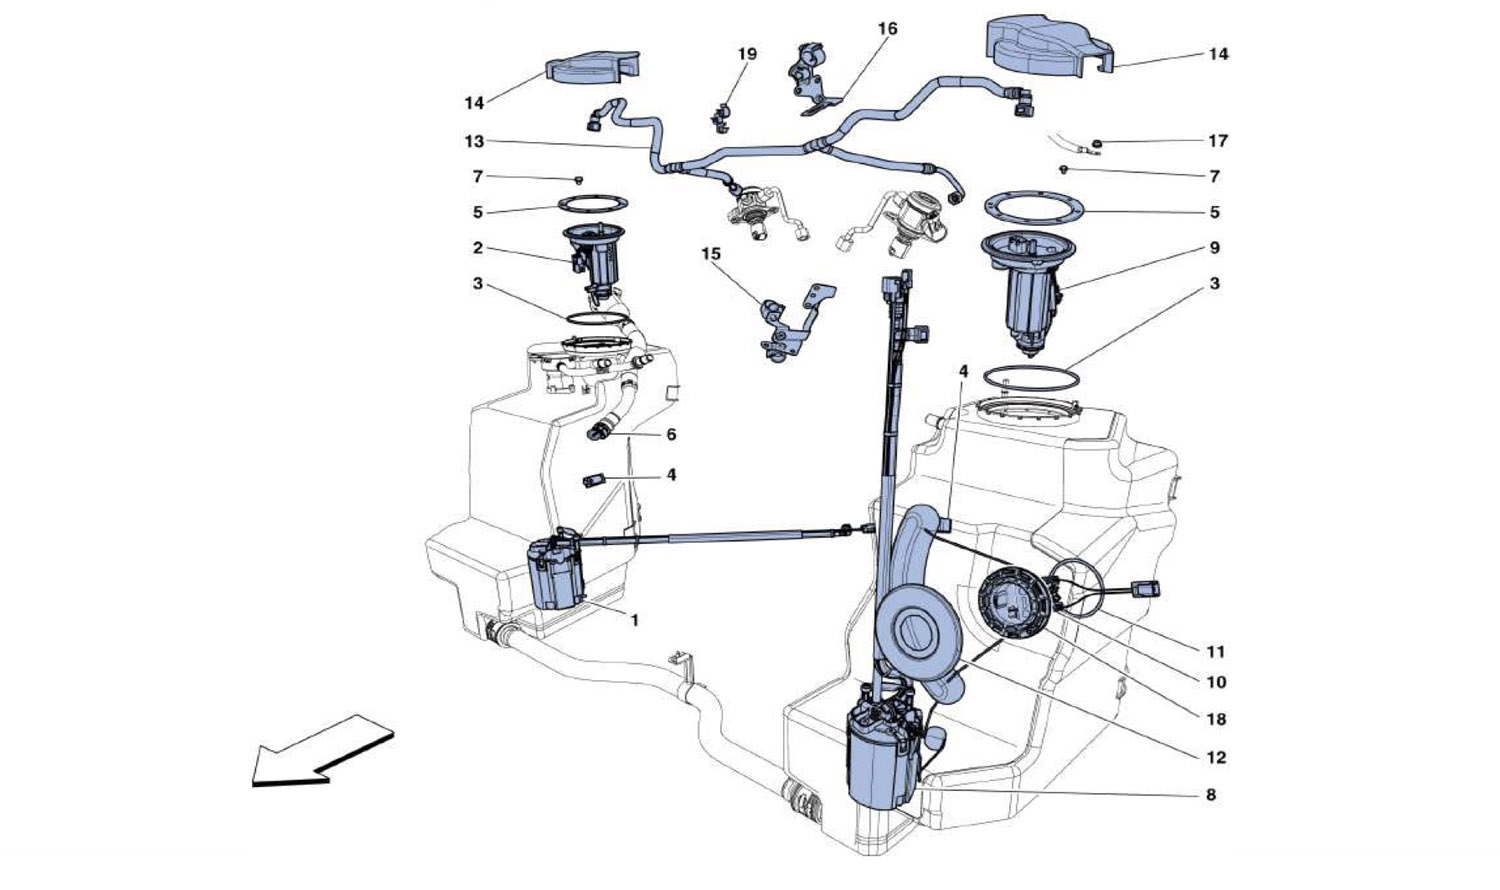 Schematic: Fuel Pumps And Pipes